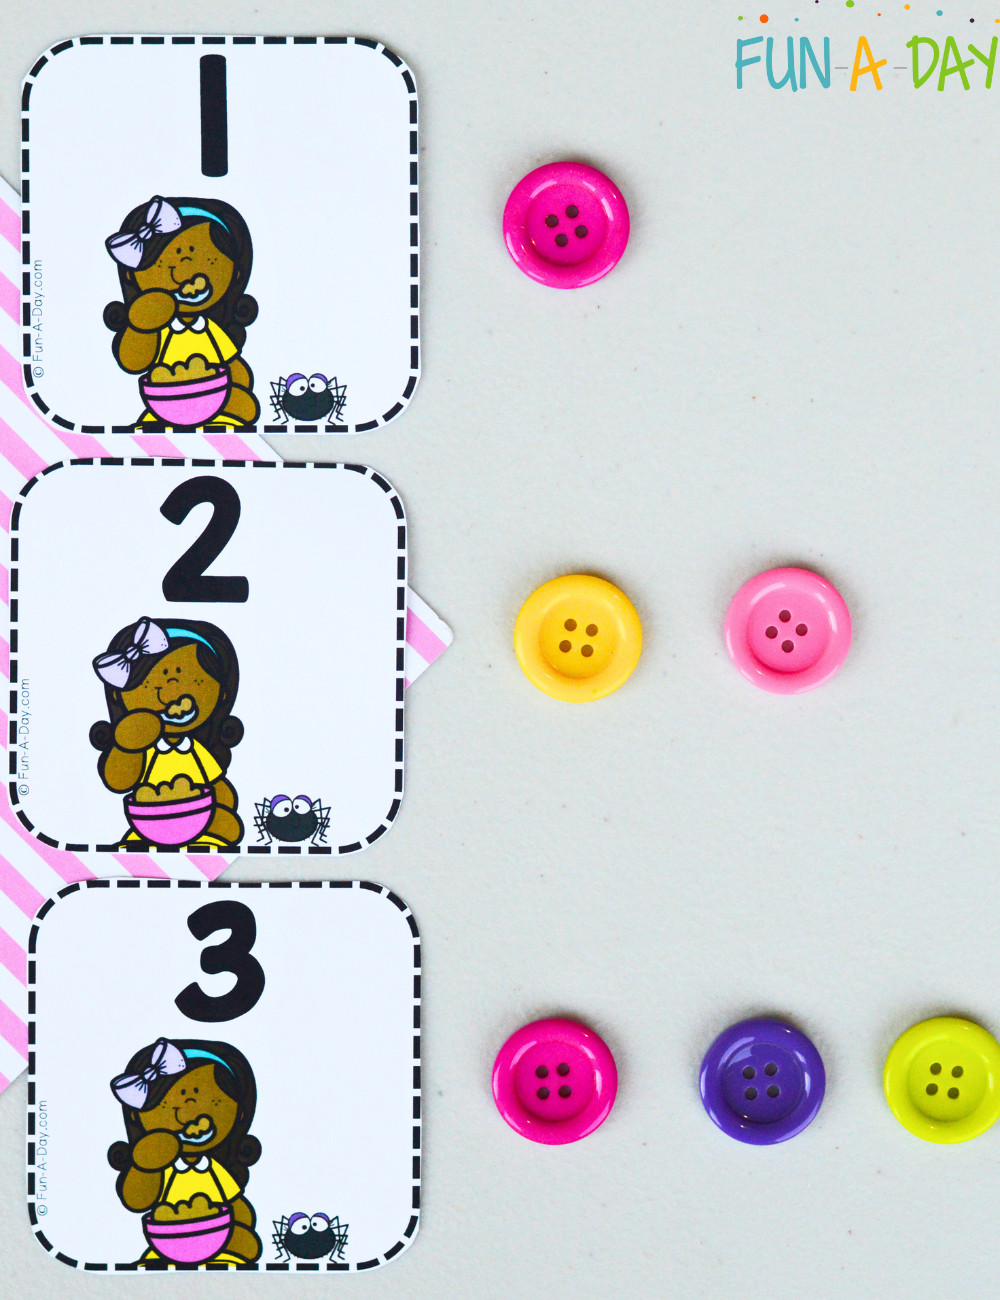 Counting activity with the Little Miss Muffet number cards and buttons.